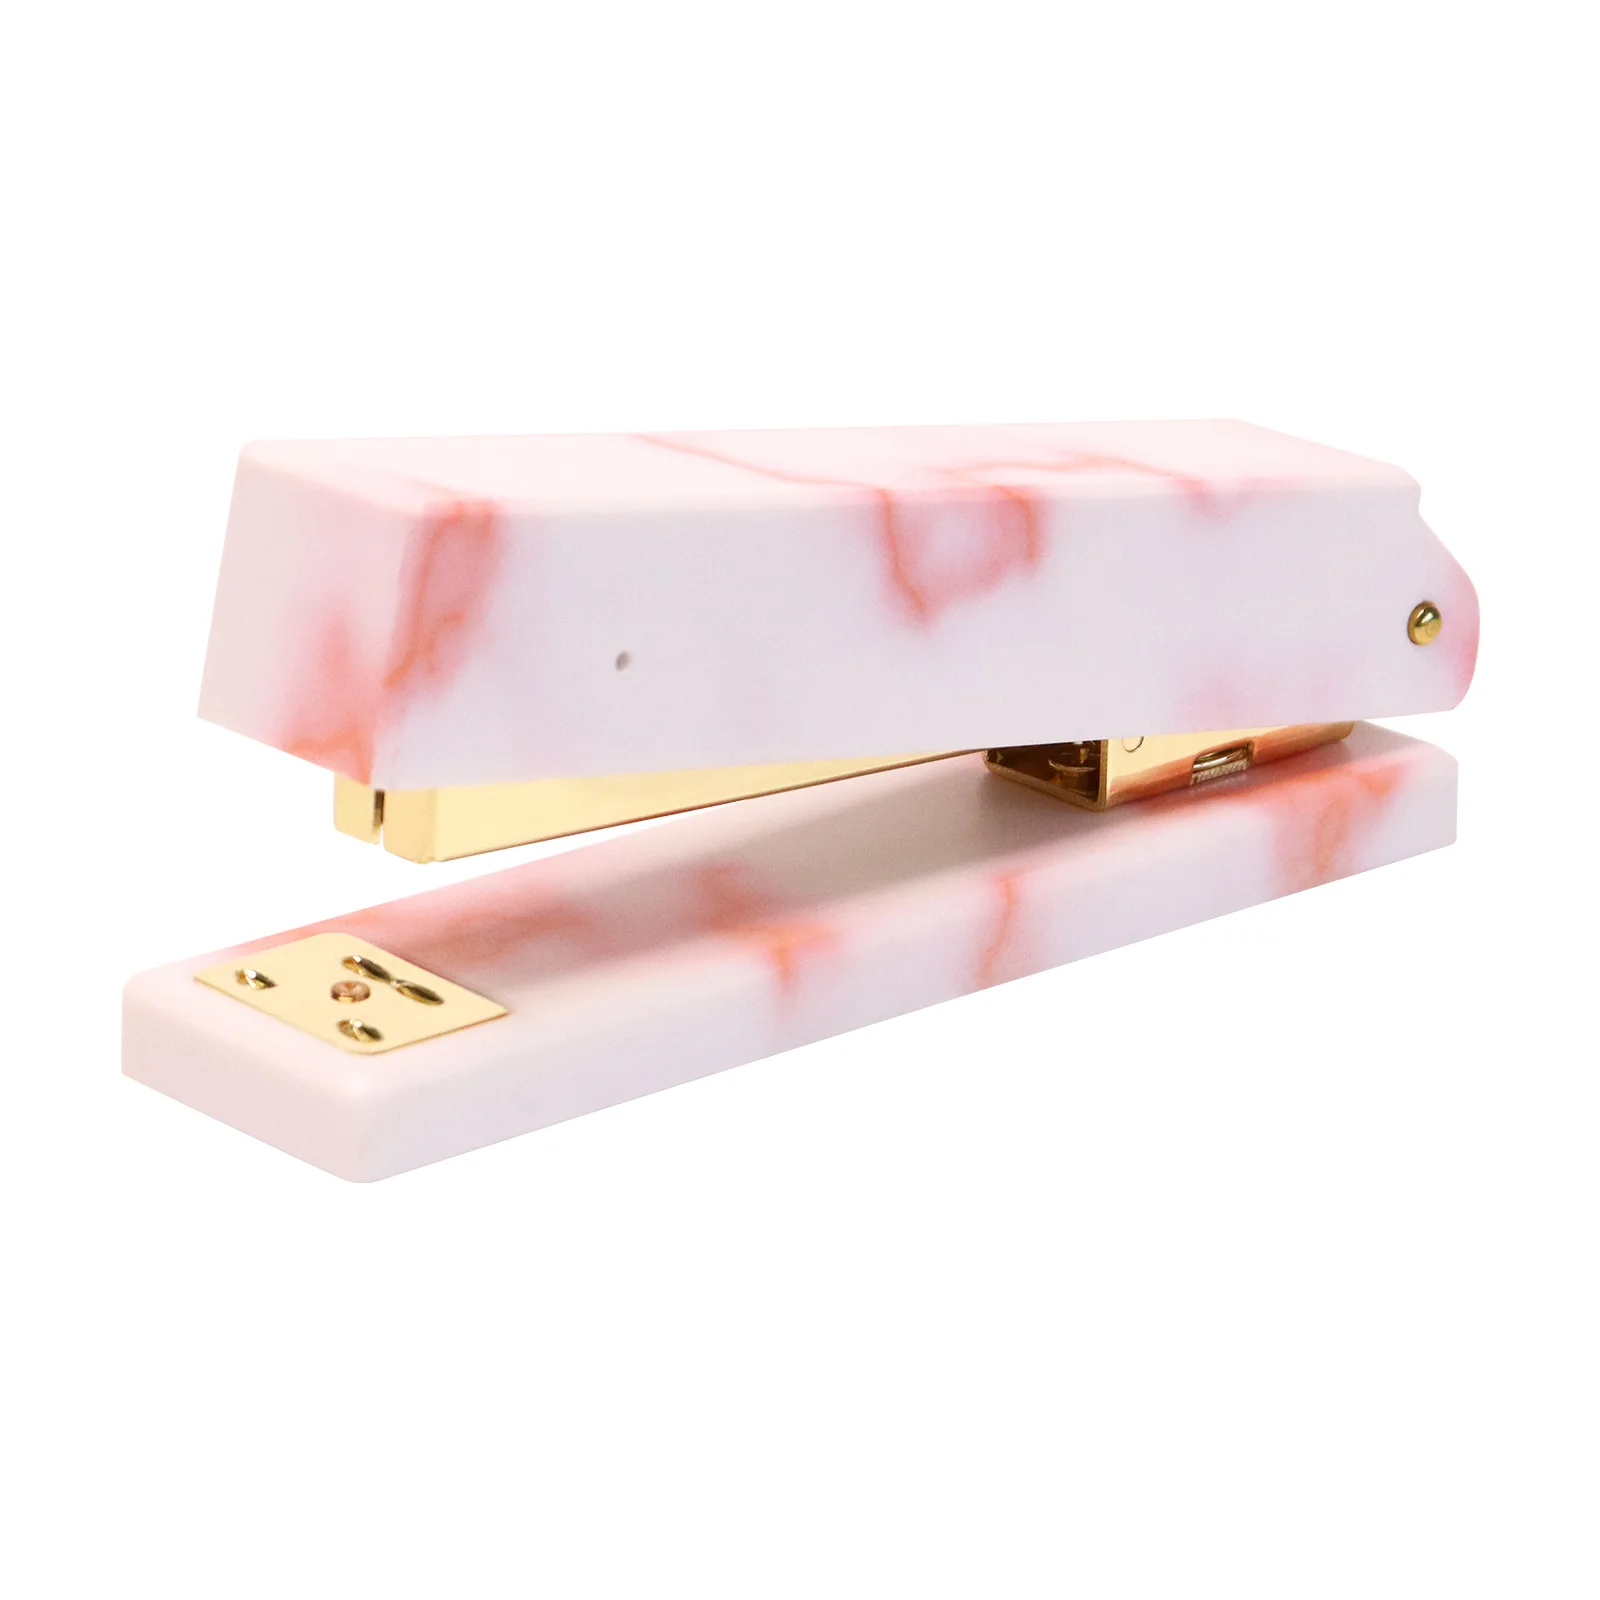 Office Accessories Marbled Golden Heavy Duty Stapler Stainless Steel Metal Core Acrylic ABS Body Desktop Stationery Supplies